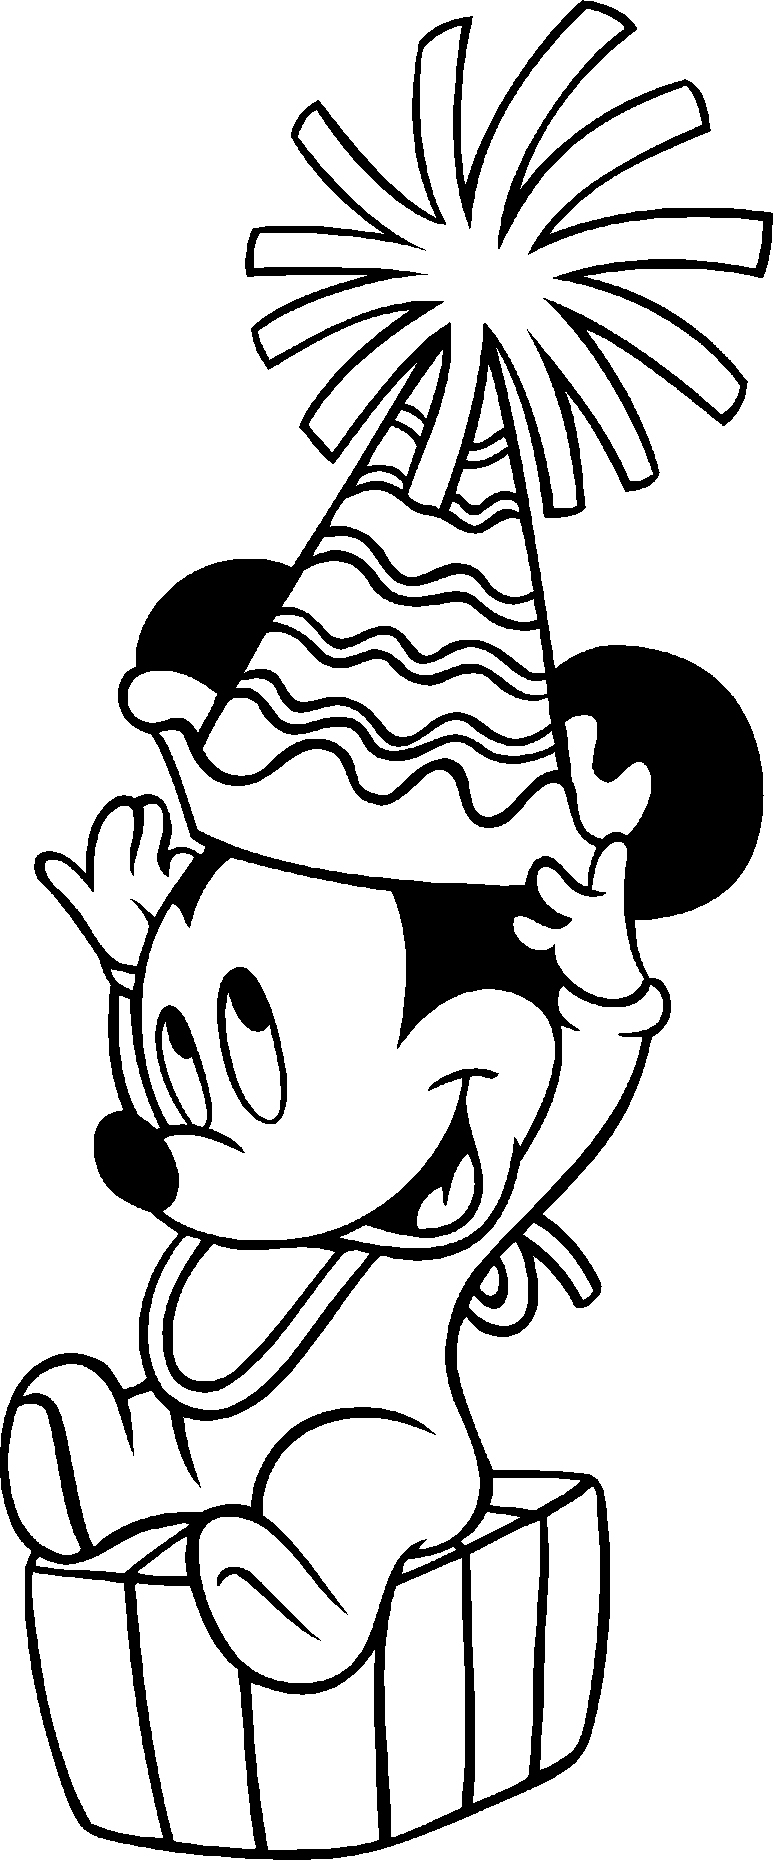 Mickey mouse birthday clipart 9